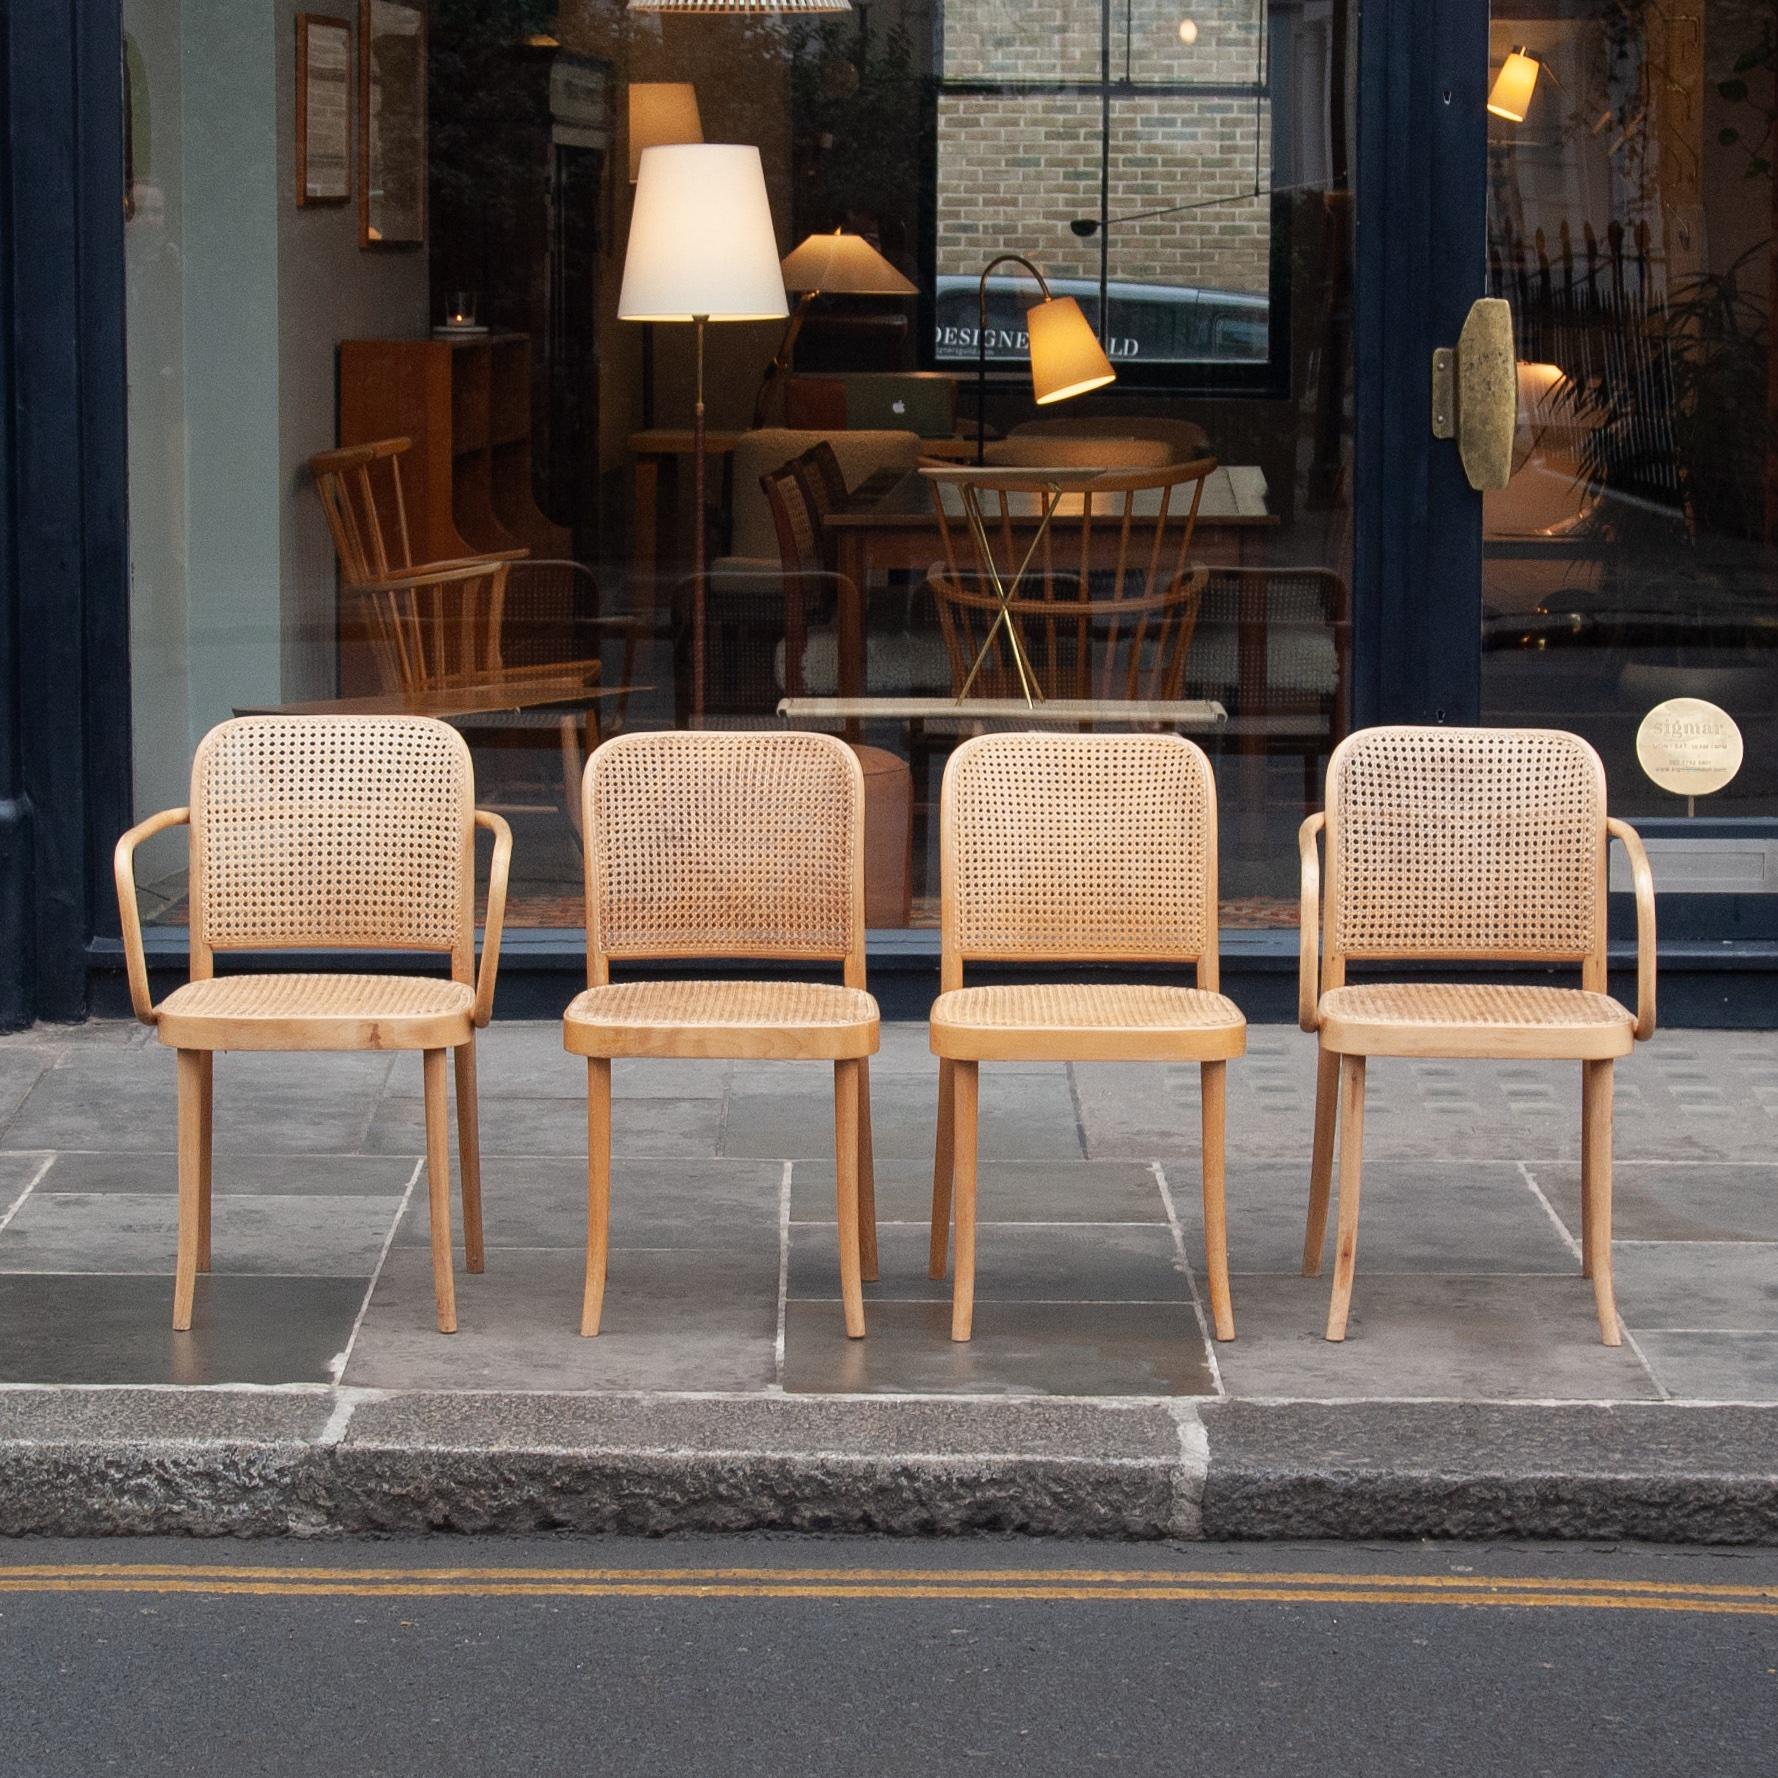 A set of 4 birch model 811 chairs designed in the mid- to late-1920s. The chairs feature handwoven cane seats and backs which provide comfort and give lightness to the design. The No.811 is attributed to Austrian architects Josef Hoffman and Josef